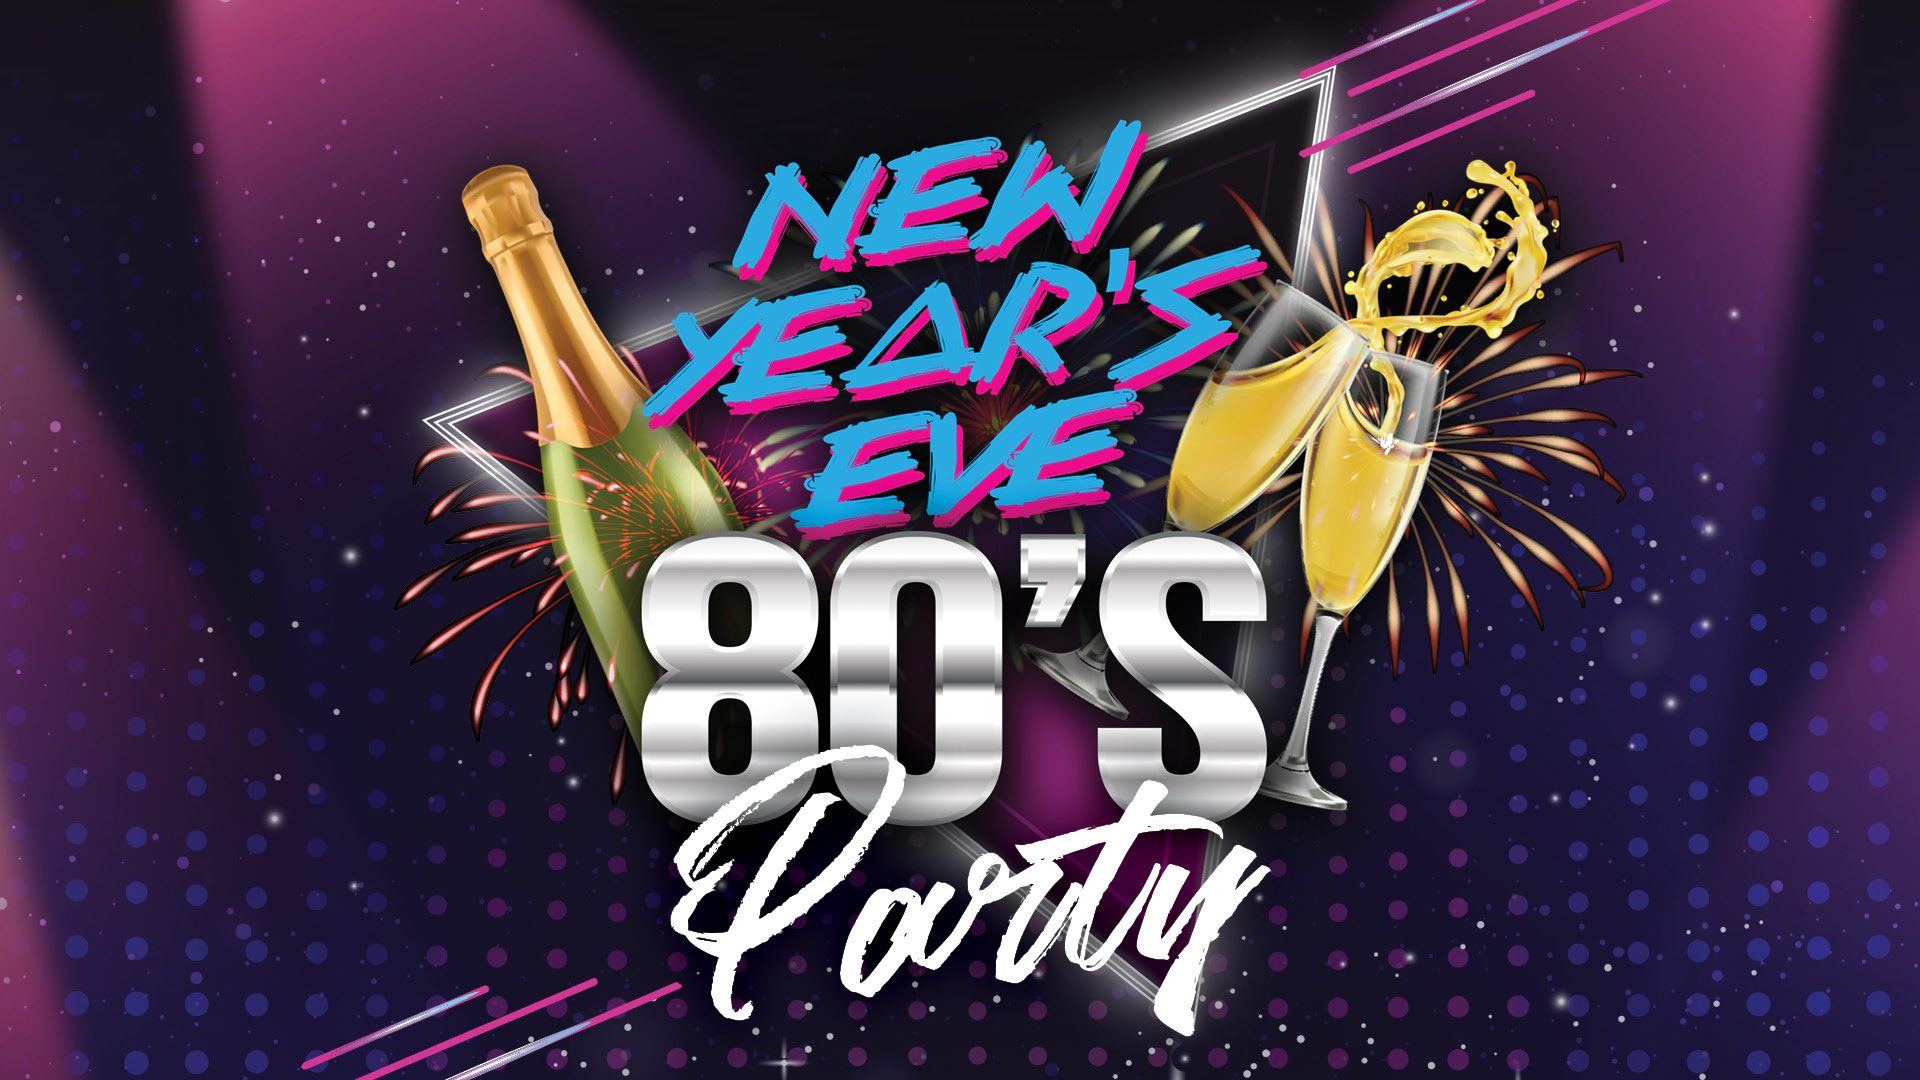 New Year's Eve 80's Party